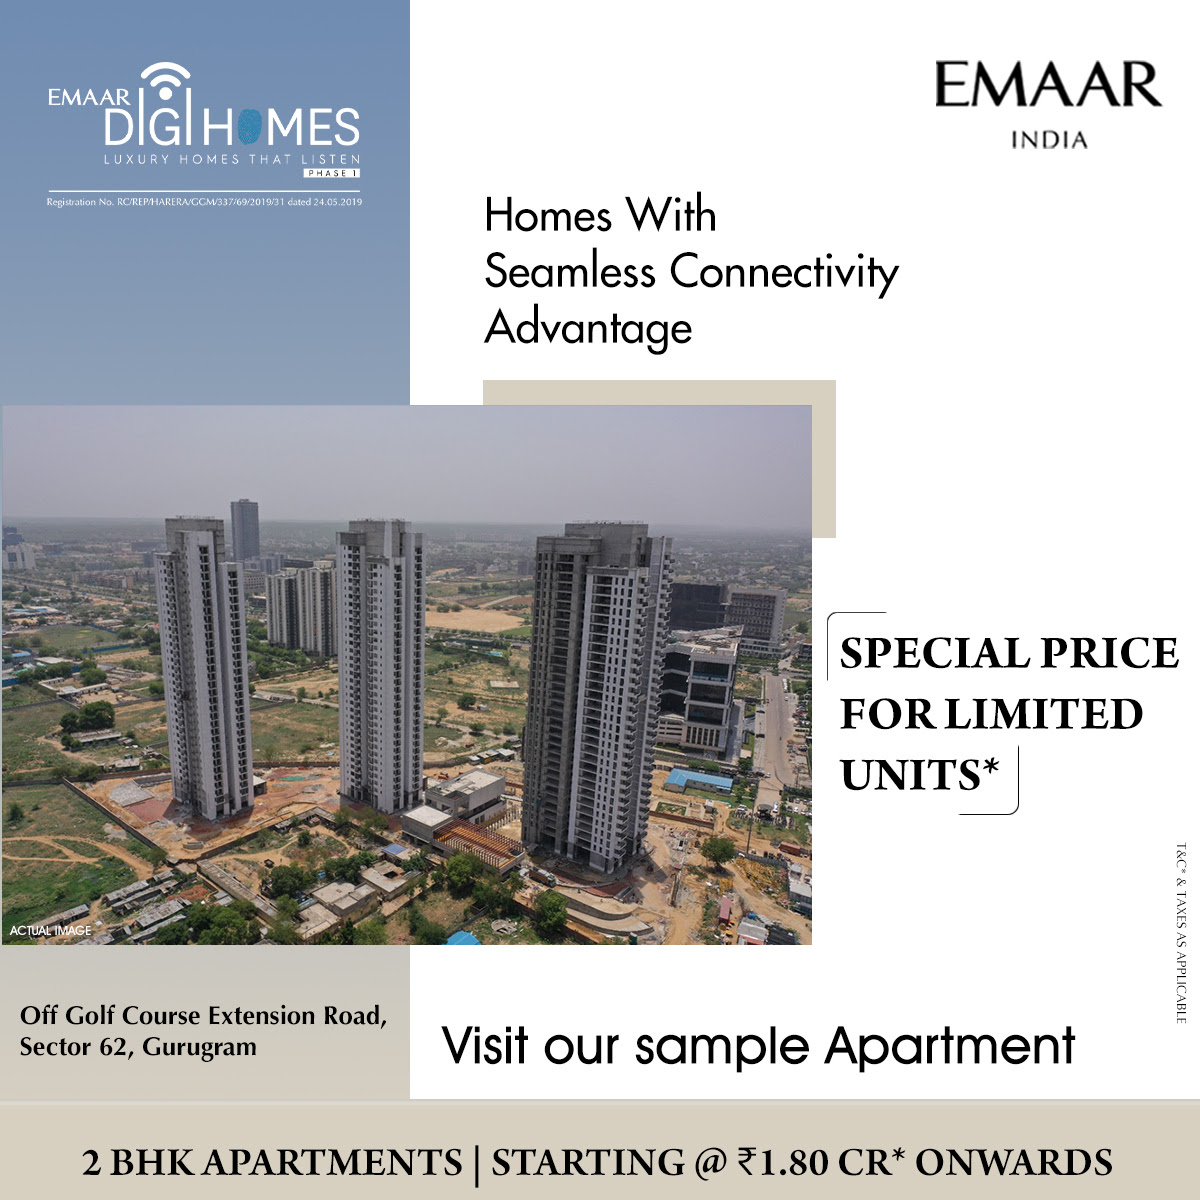 Special price for limited units at Emaar Digi Homes in Sector 62, Gurgaon Update